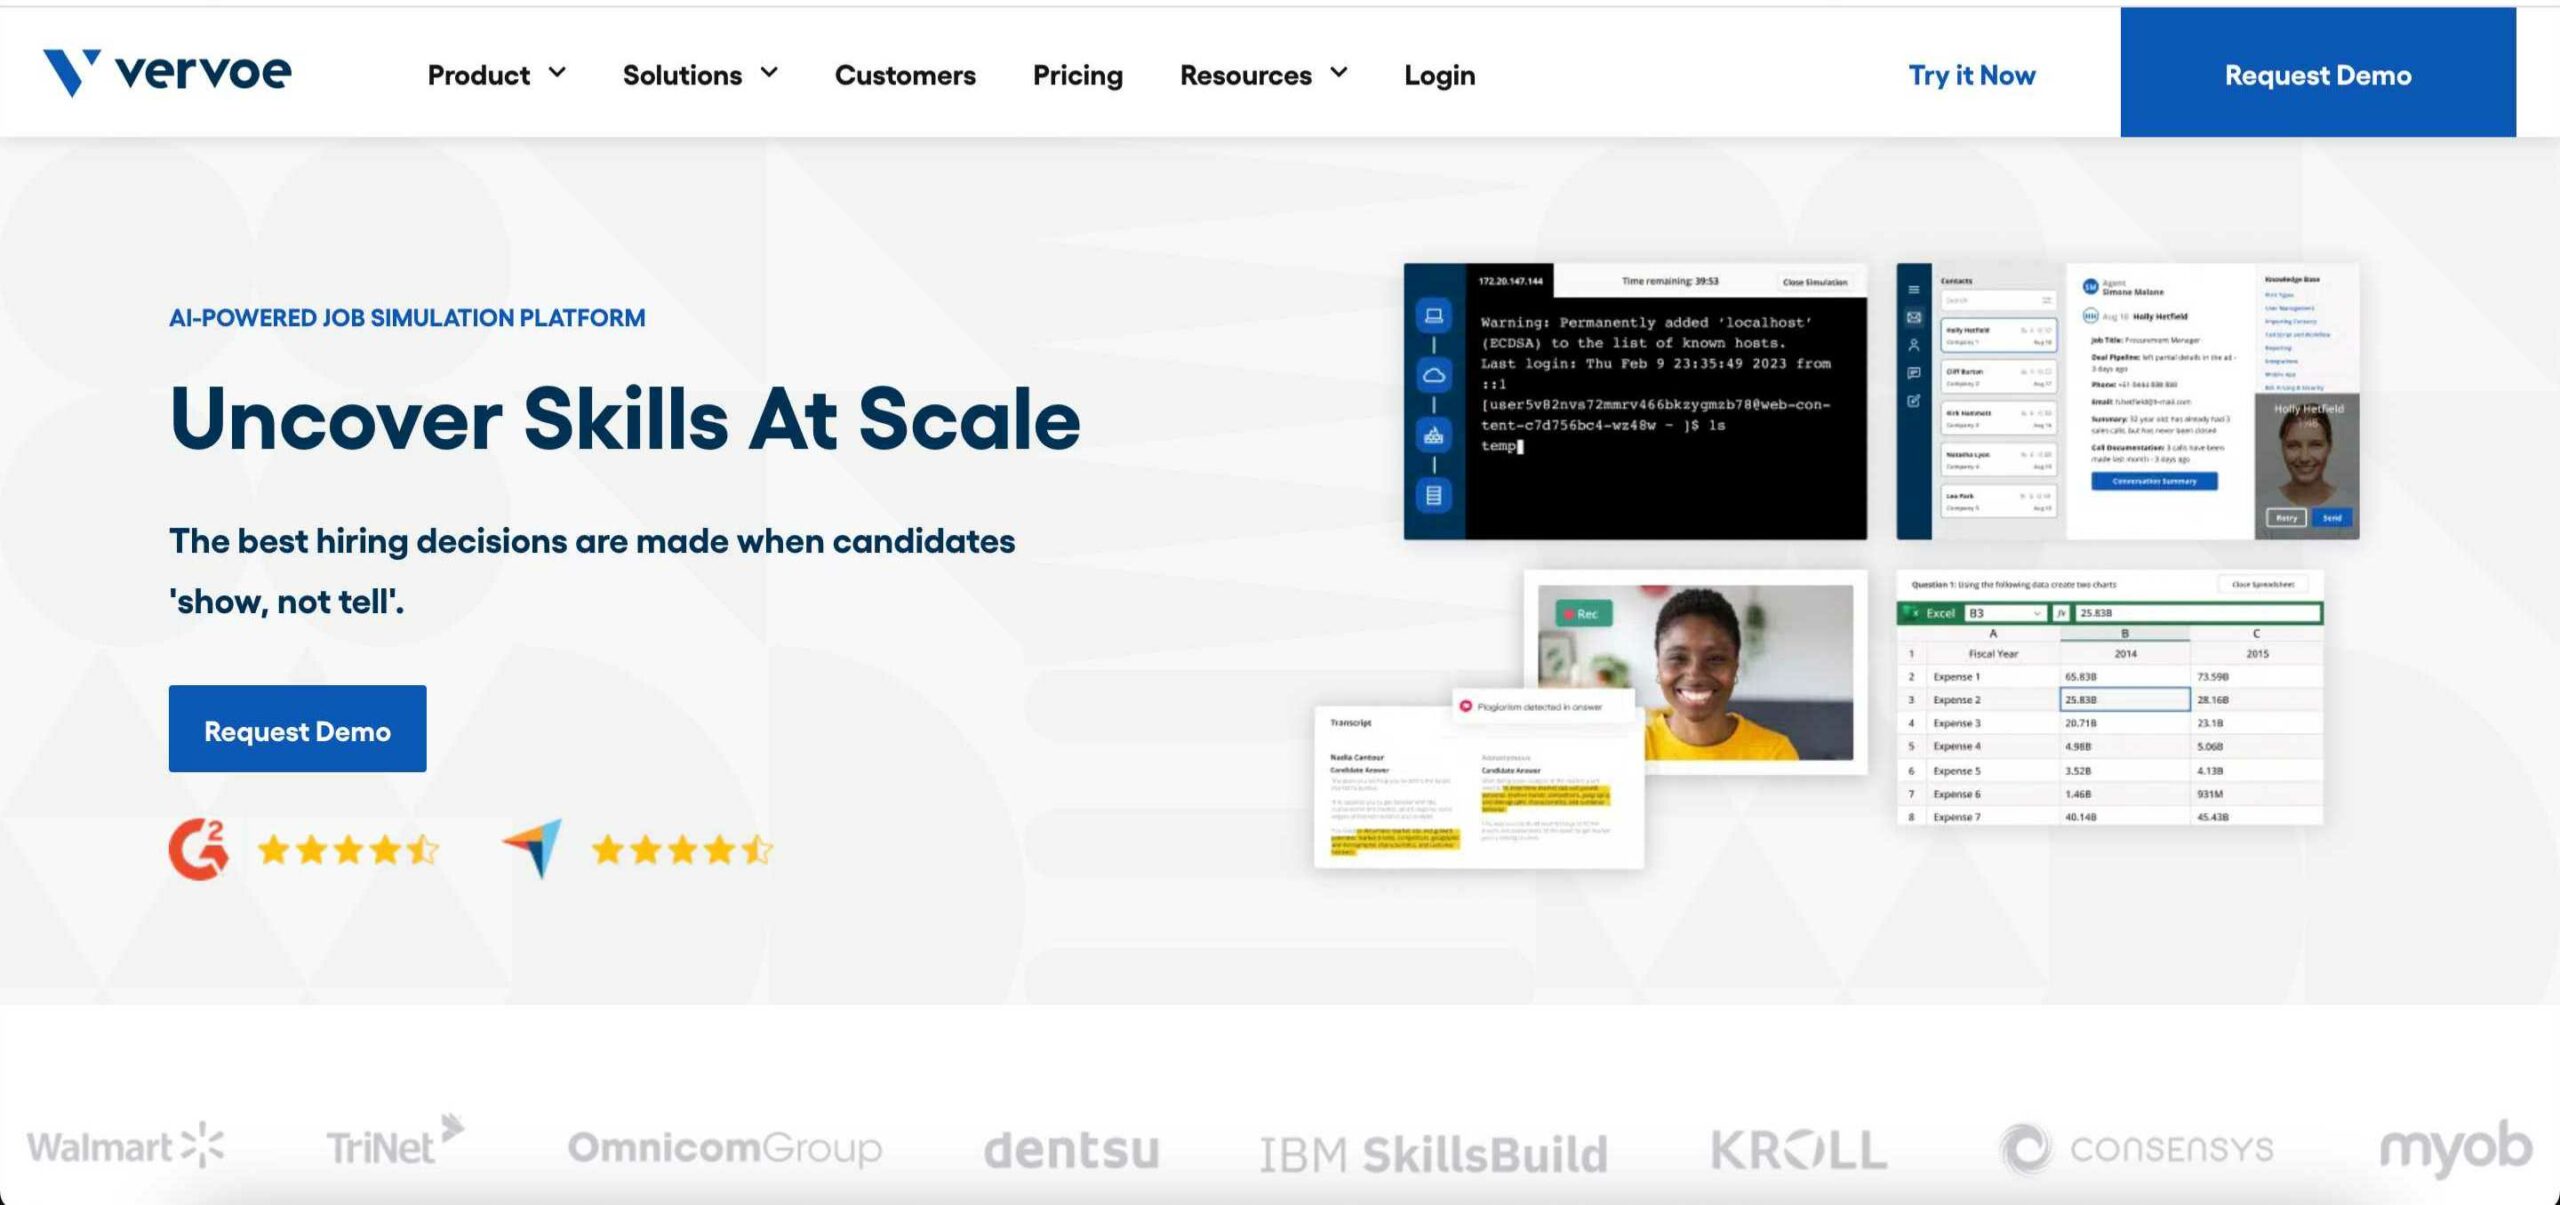 Vervoe is a popular skills-based hiring platorm to help you uncover skills at scale.